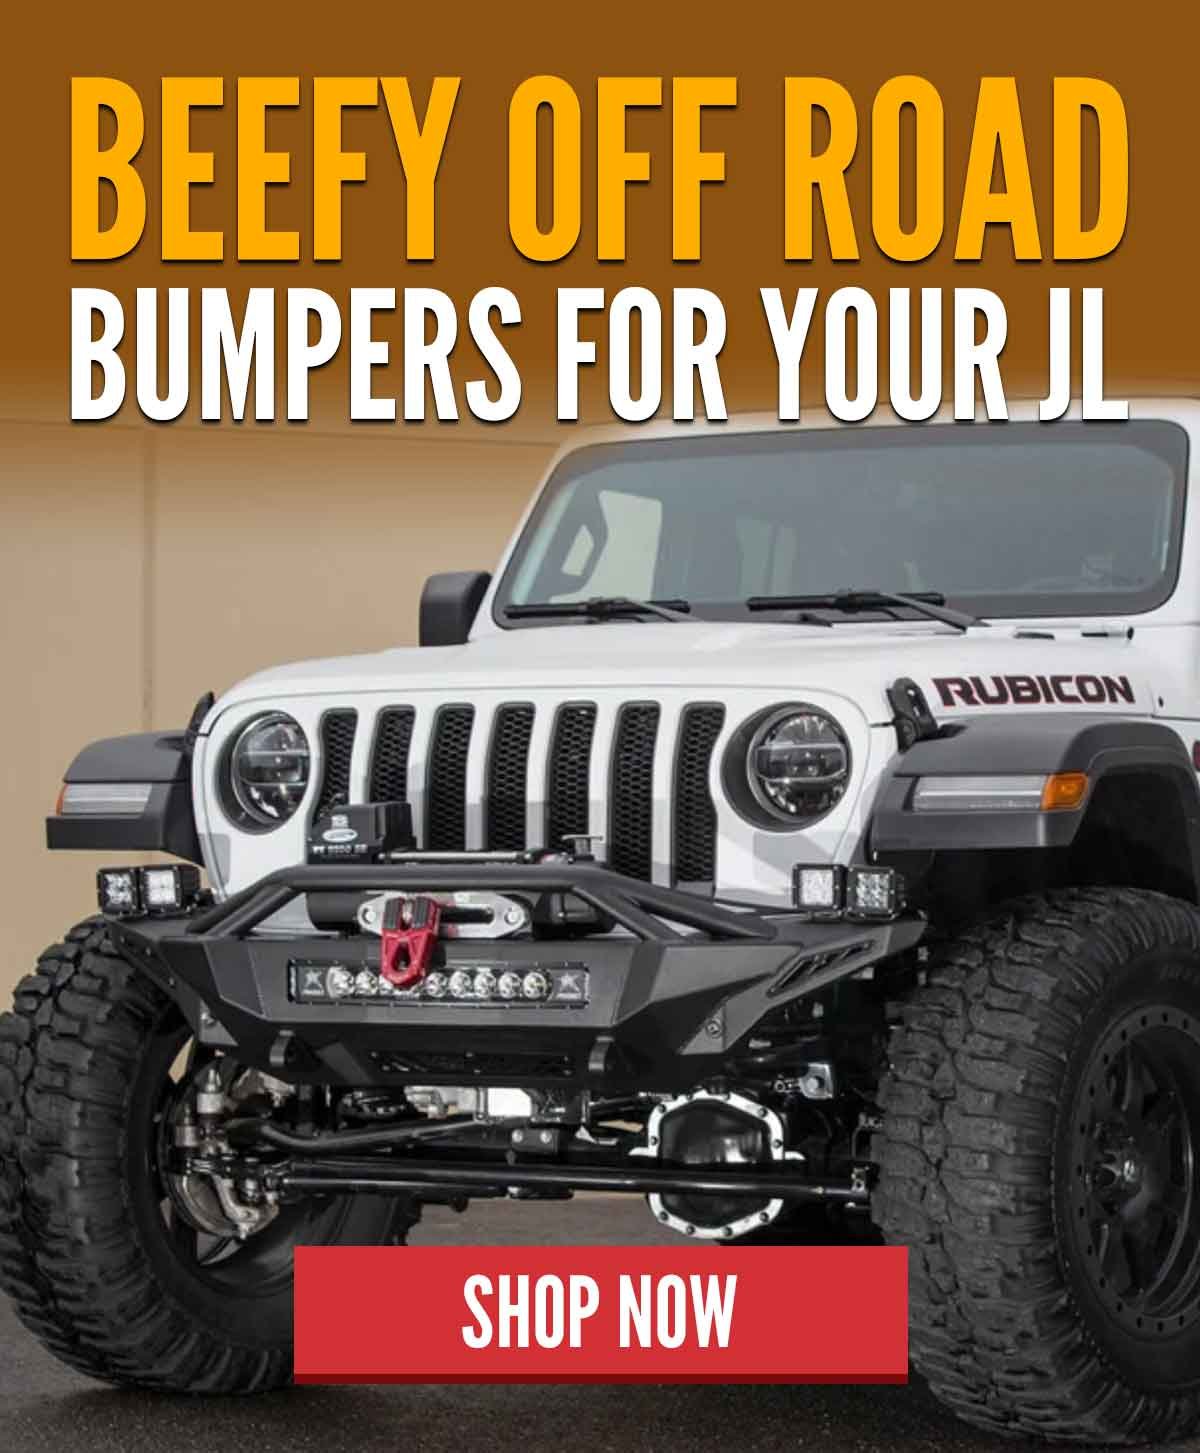 Beefy Off Road Bumpers For Your JL